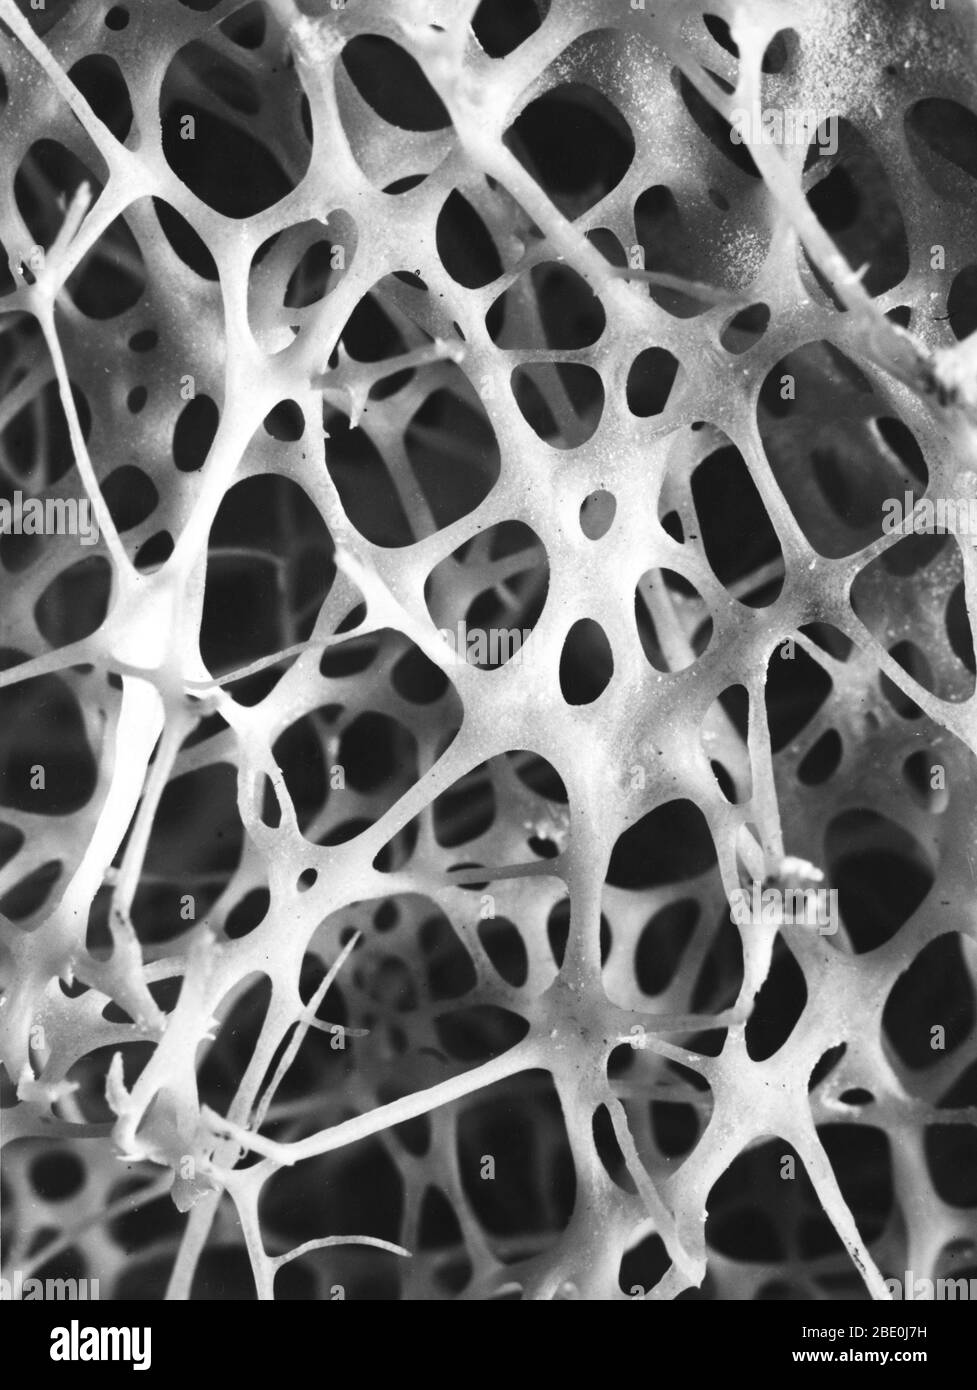 Scanning electron micrograph (SEM) of cancellous (spongy) bone of the human shin. Bone tissue is either compact or cancellous. Compact bone usually makes up the exterior of the bone, while cancellous bone is found in the interior. Cancellous bone is characterised by a honeycomb arrangement of trabeculae. These structures help to provide support and strength. The spaces within this tissue normally contain bone marrow, a blood forming substance. Stock Photo